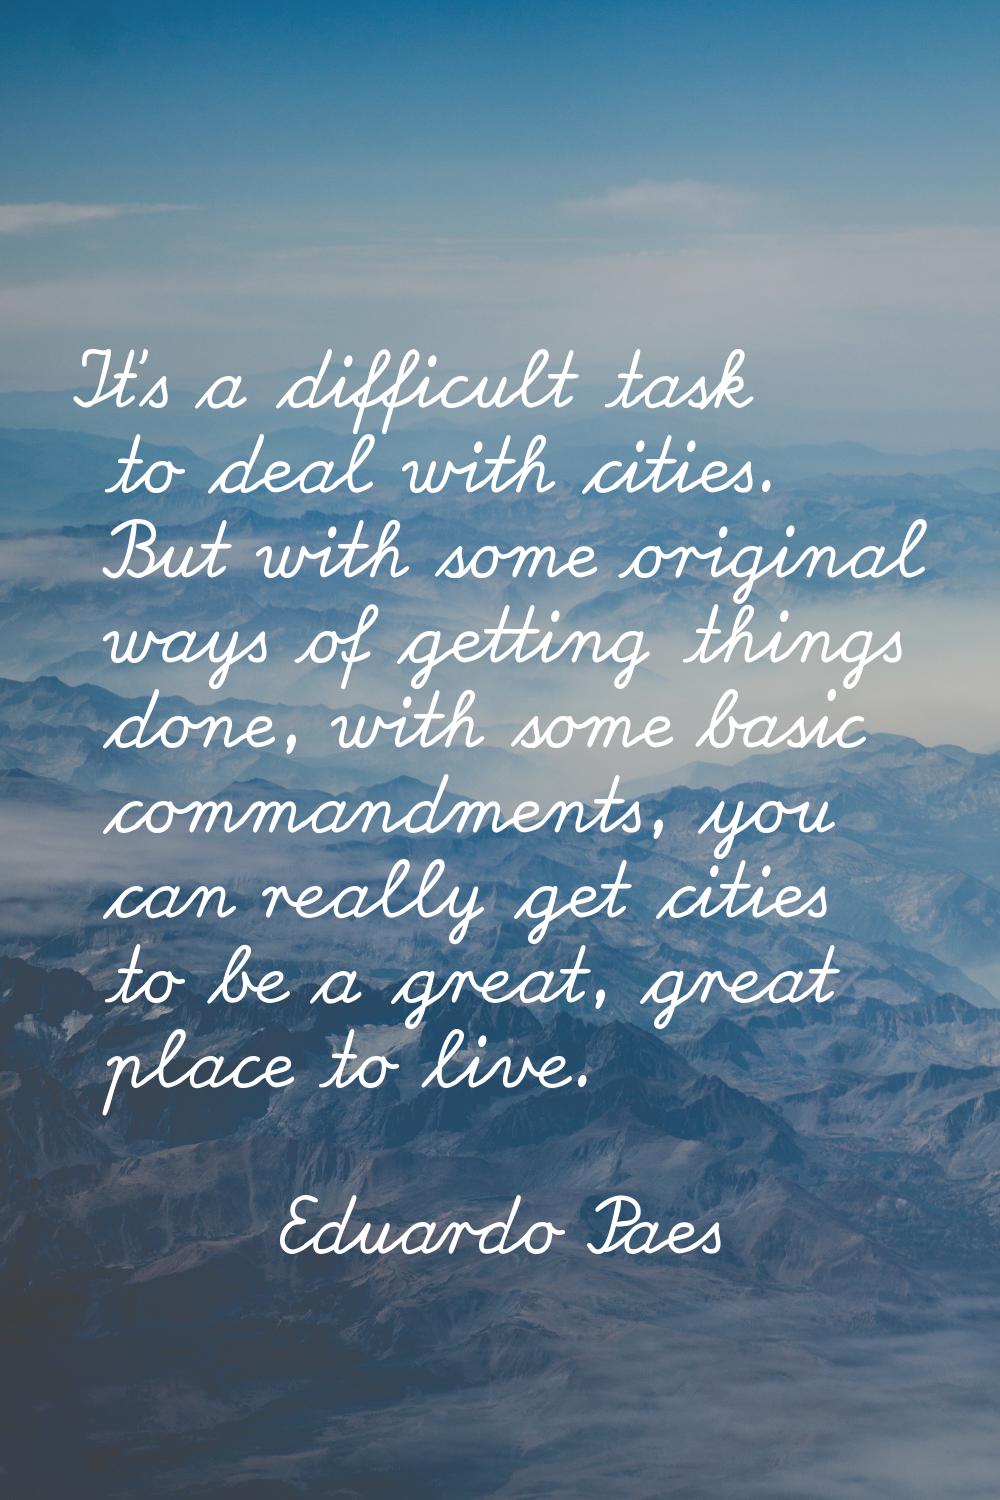 It's a difficult task to deal with cities. But with some original ways of getting things done, with